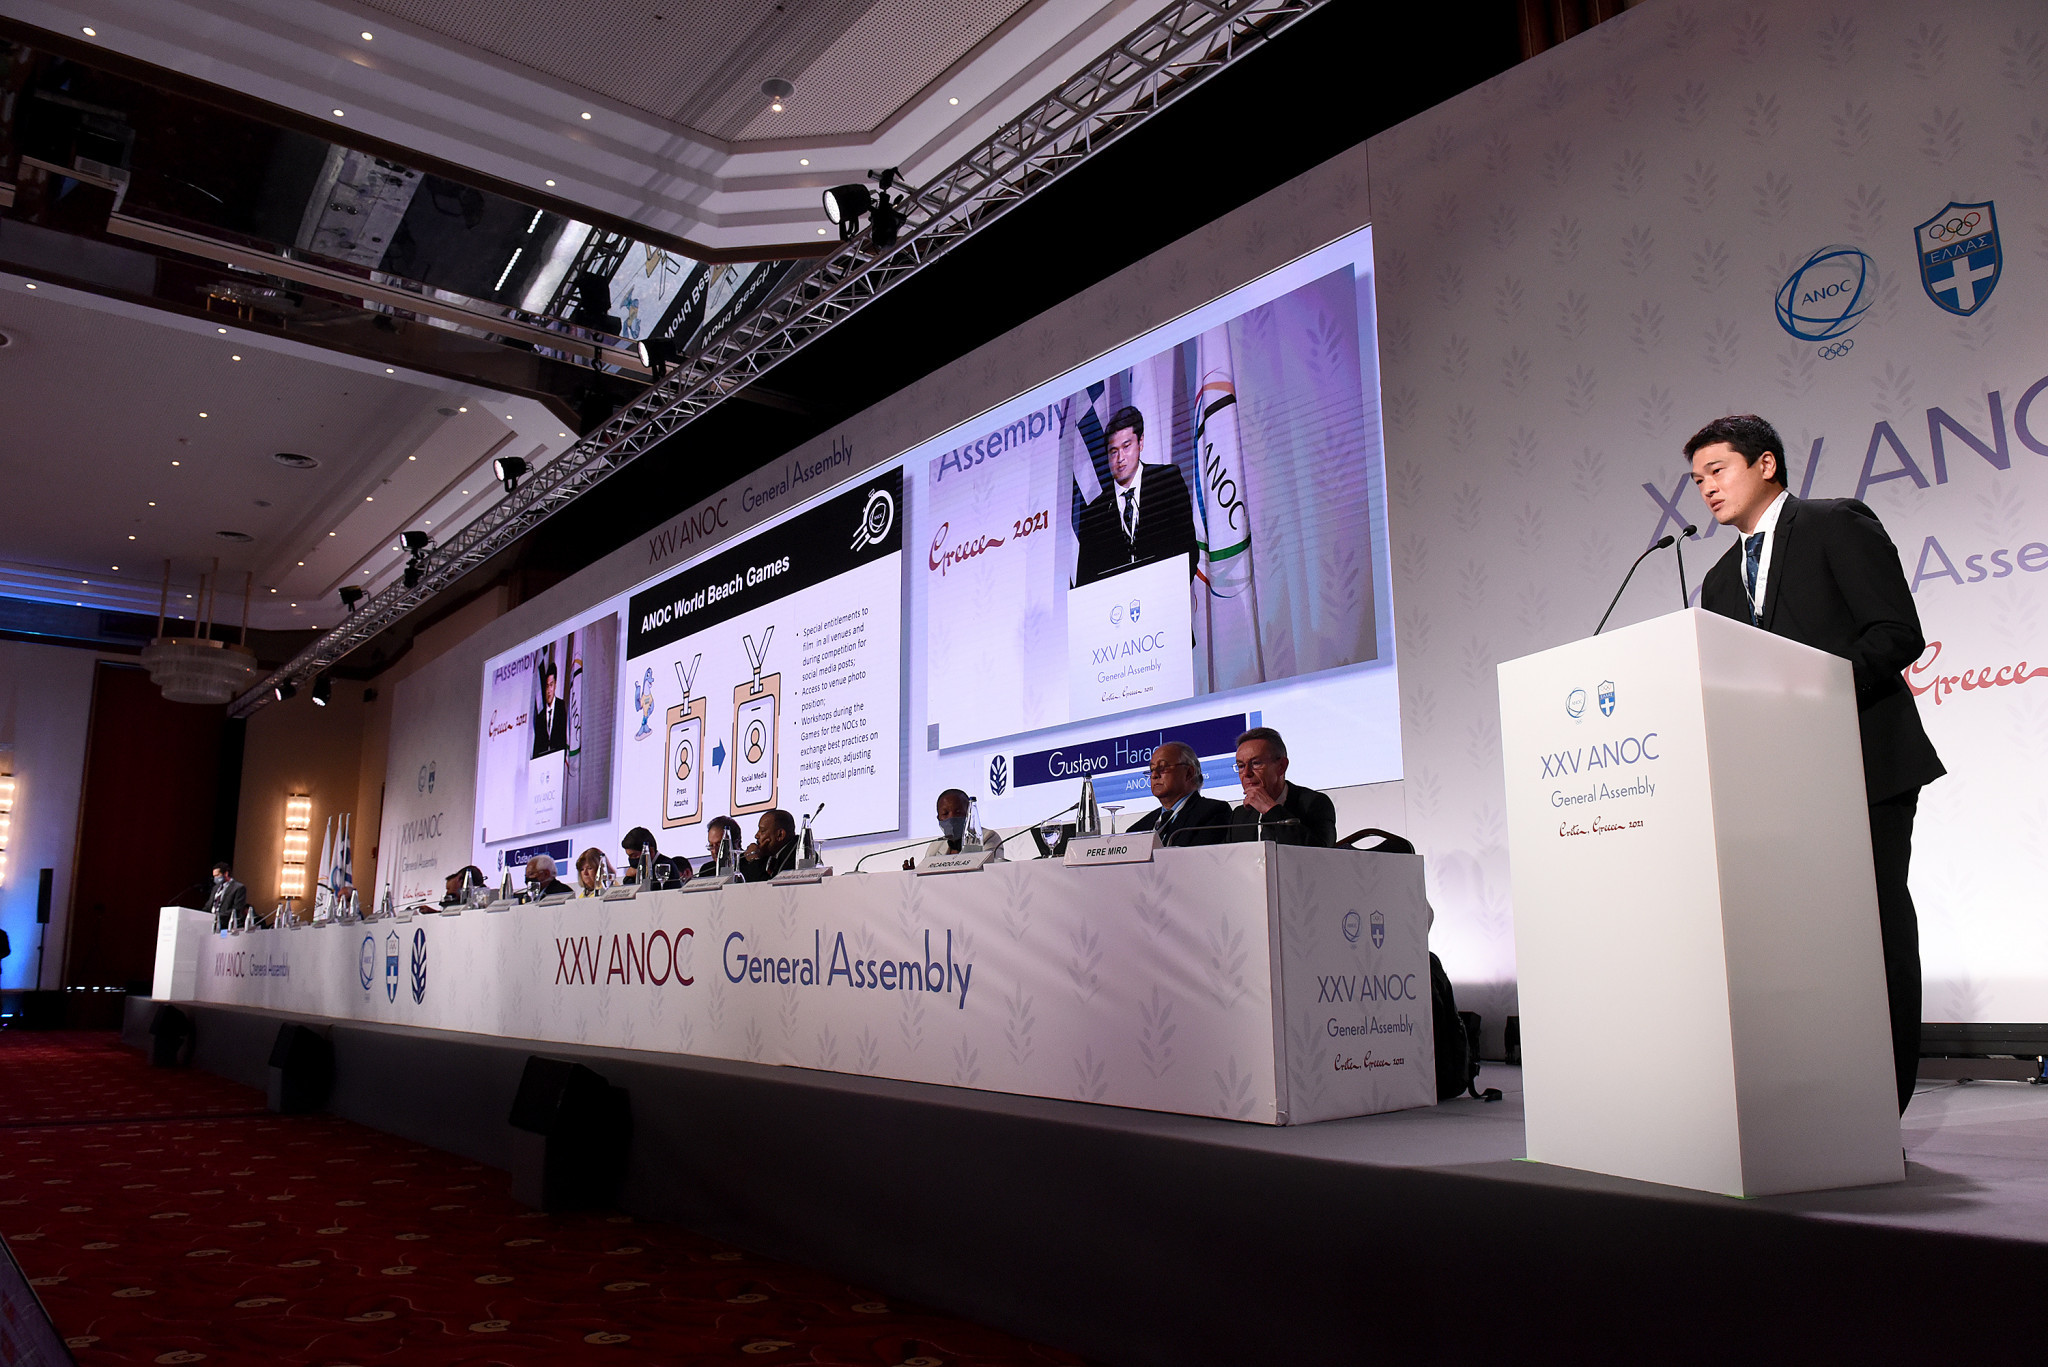 Social media statistics were presented to the General Assembly ©ANOC